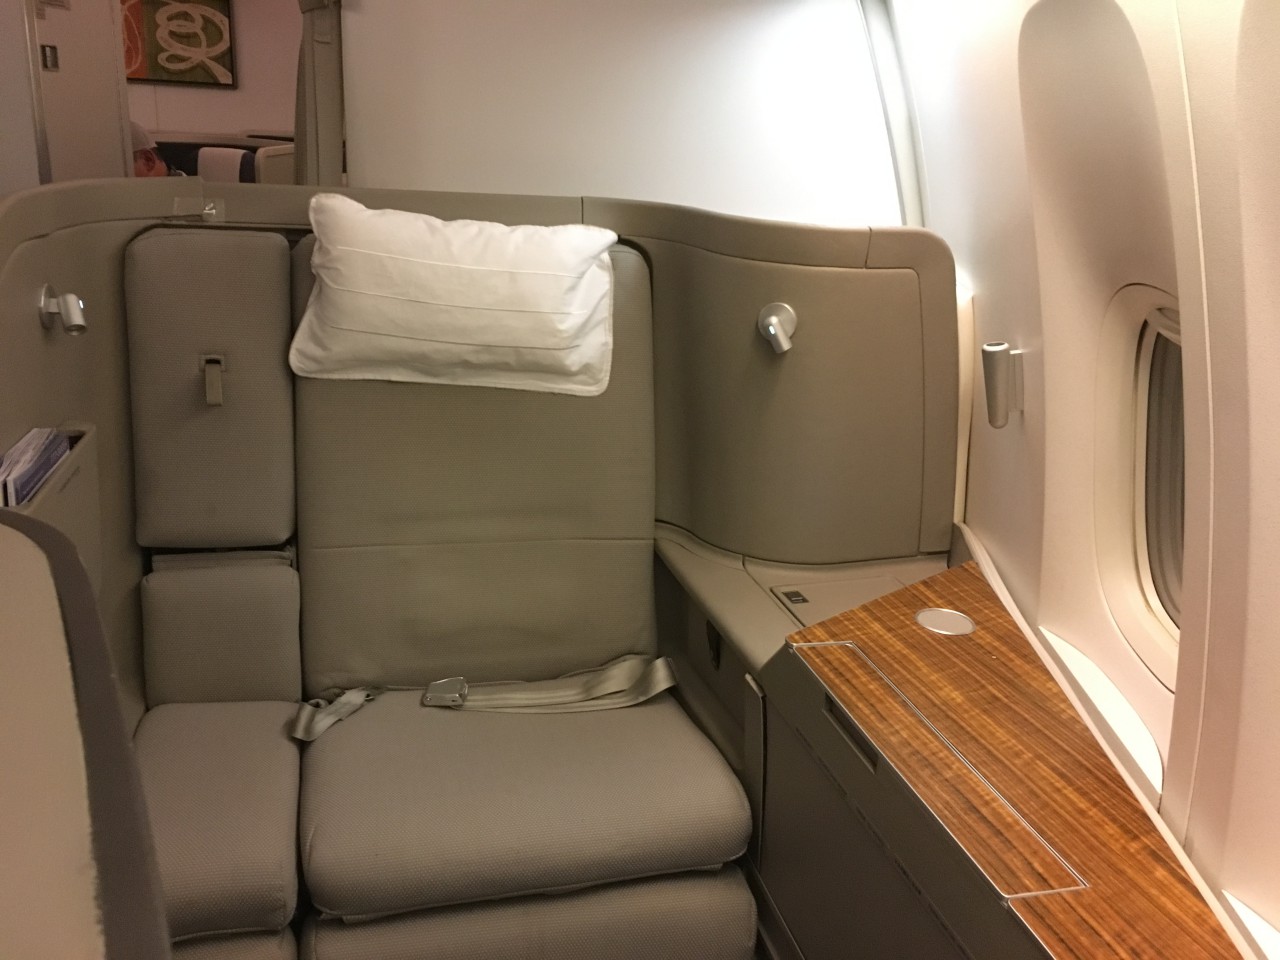 Cathay Pacific 777-300ER First Class Seat﻿